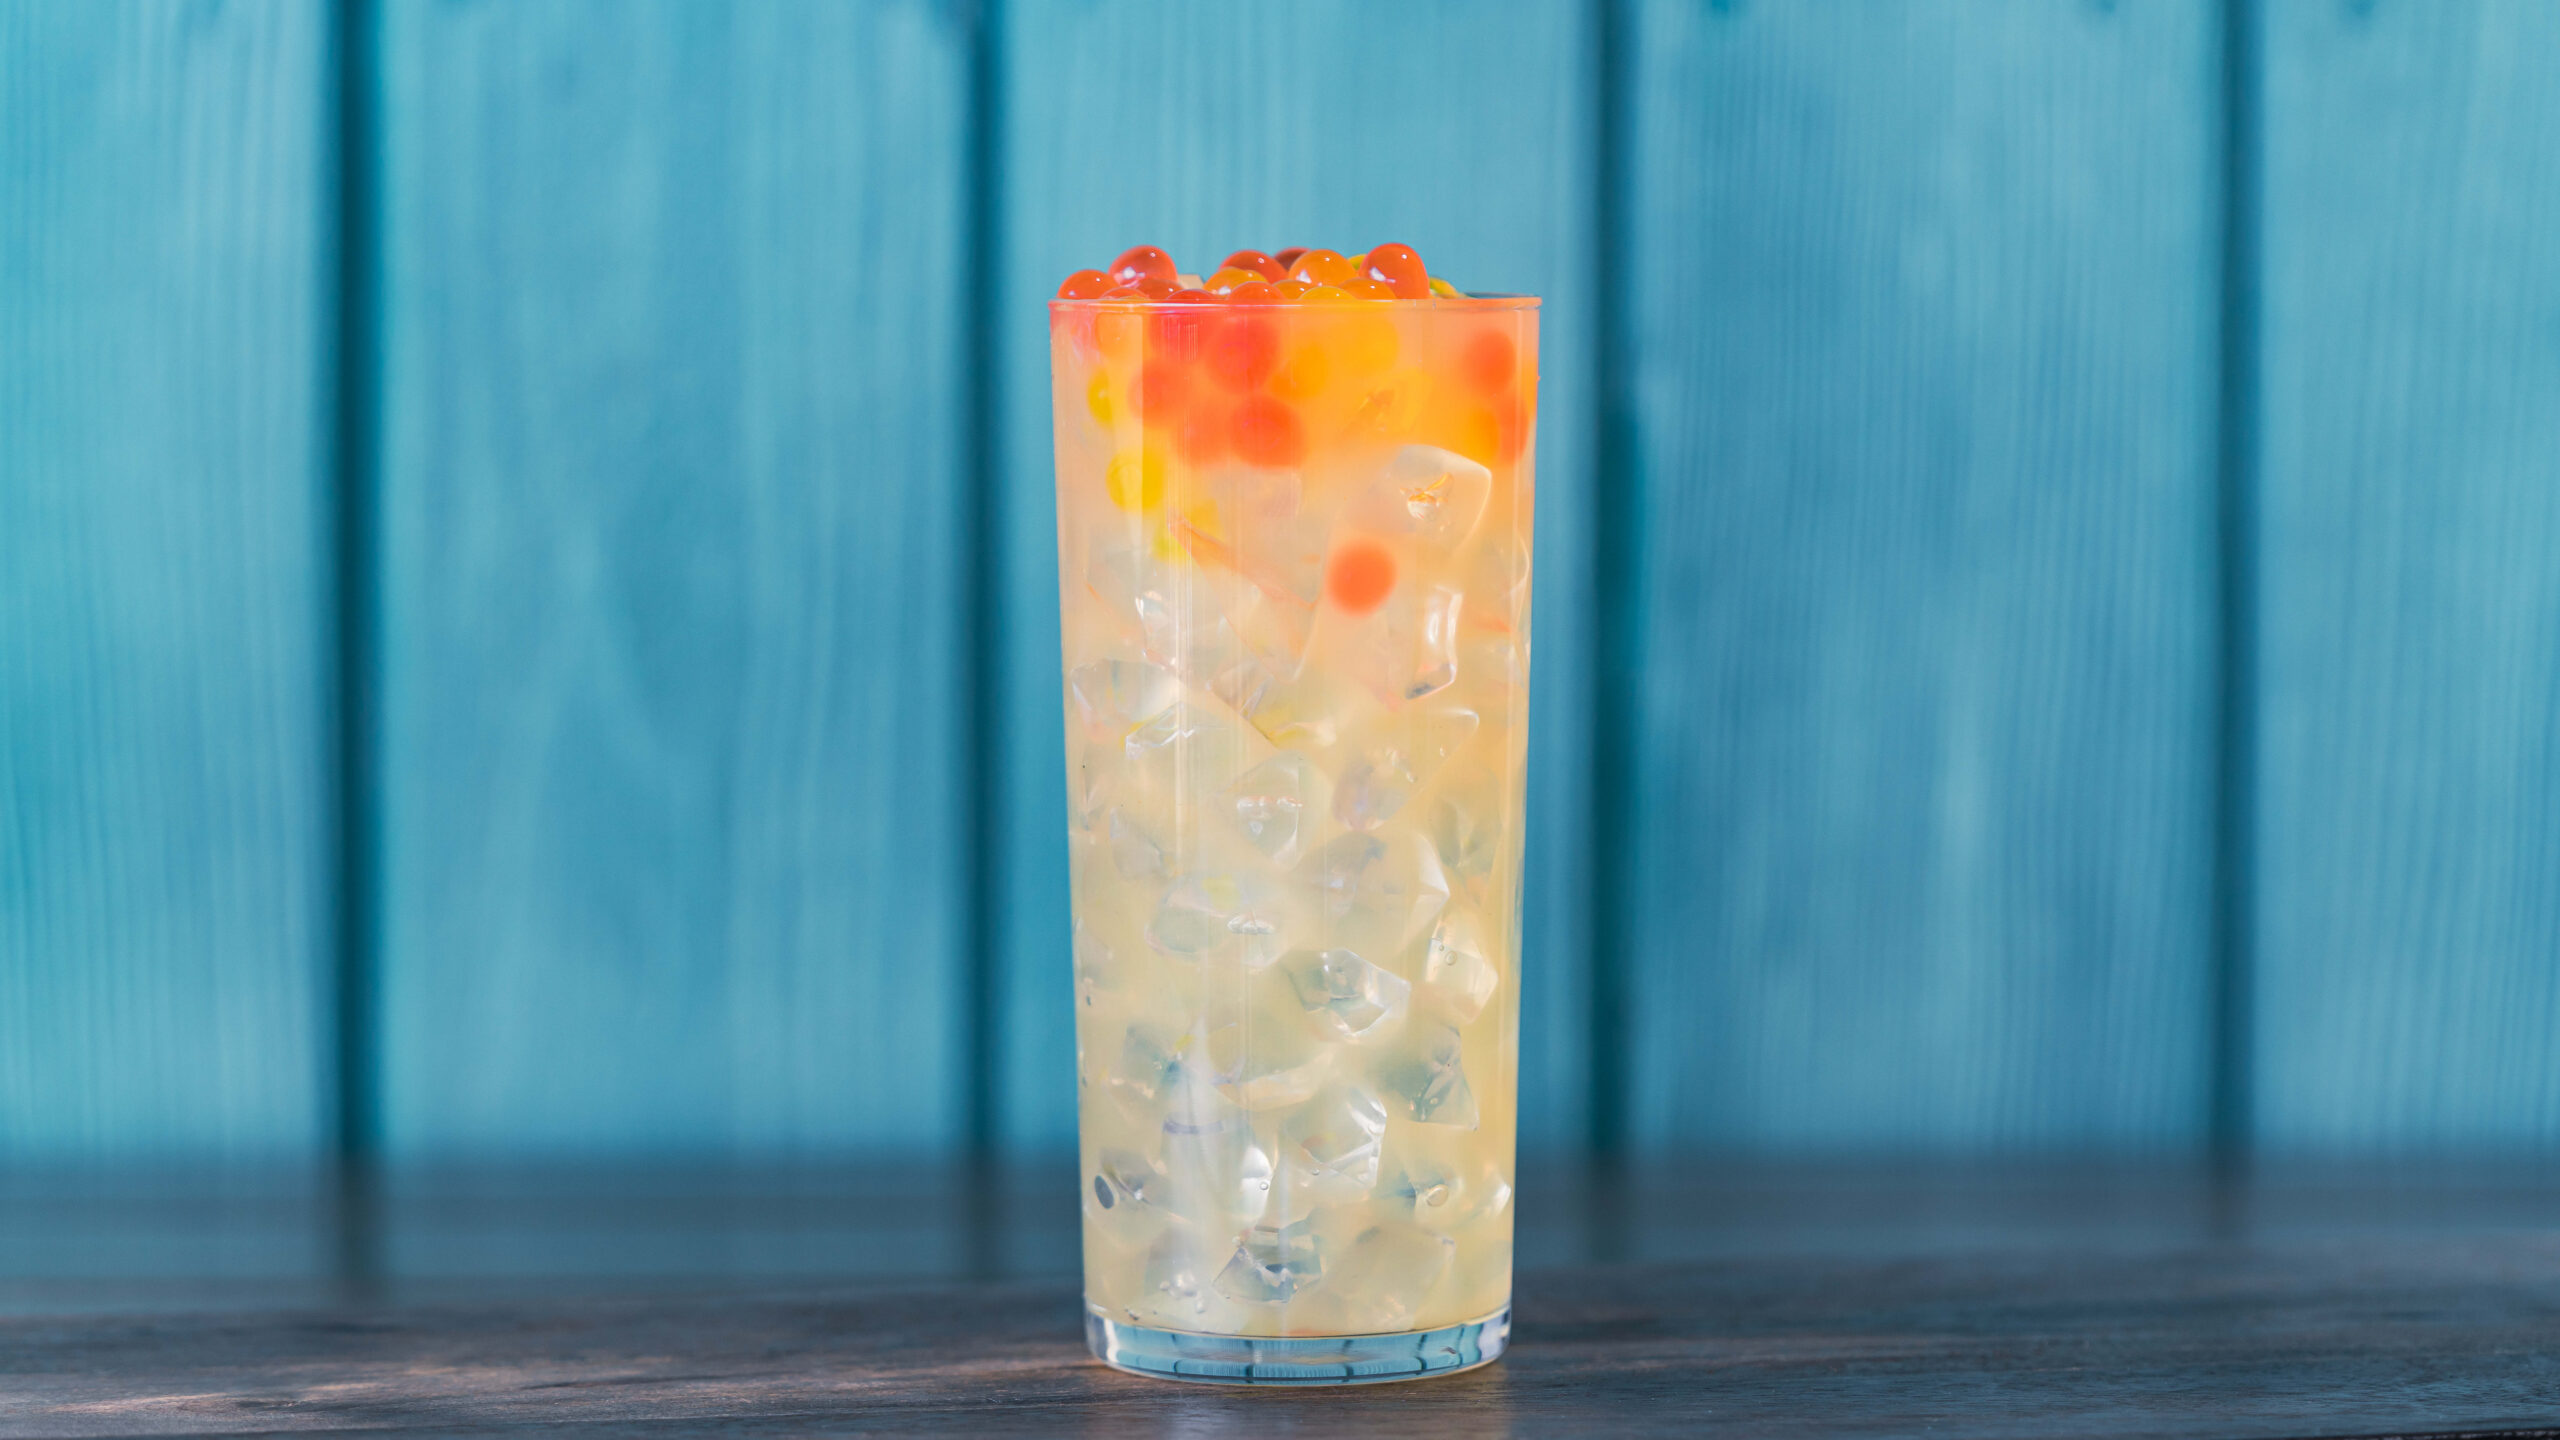 Honey Lemon-Ade (Aunt Cass Café) – Minute Maid Lemonade Zero Sugar and yuzu purée with passion fruit and strawberry popping spheres. Available later in summer 2023. For more details, visit DisneyParksBlog.com. (David Nguyen/Disneyland Resort)